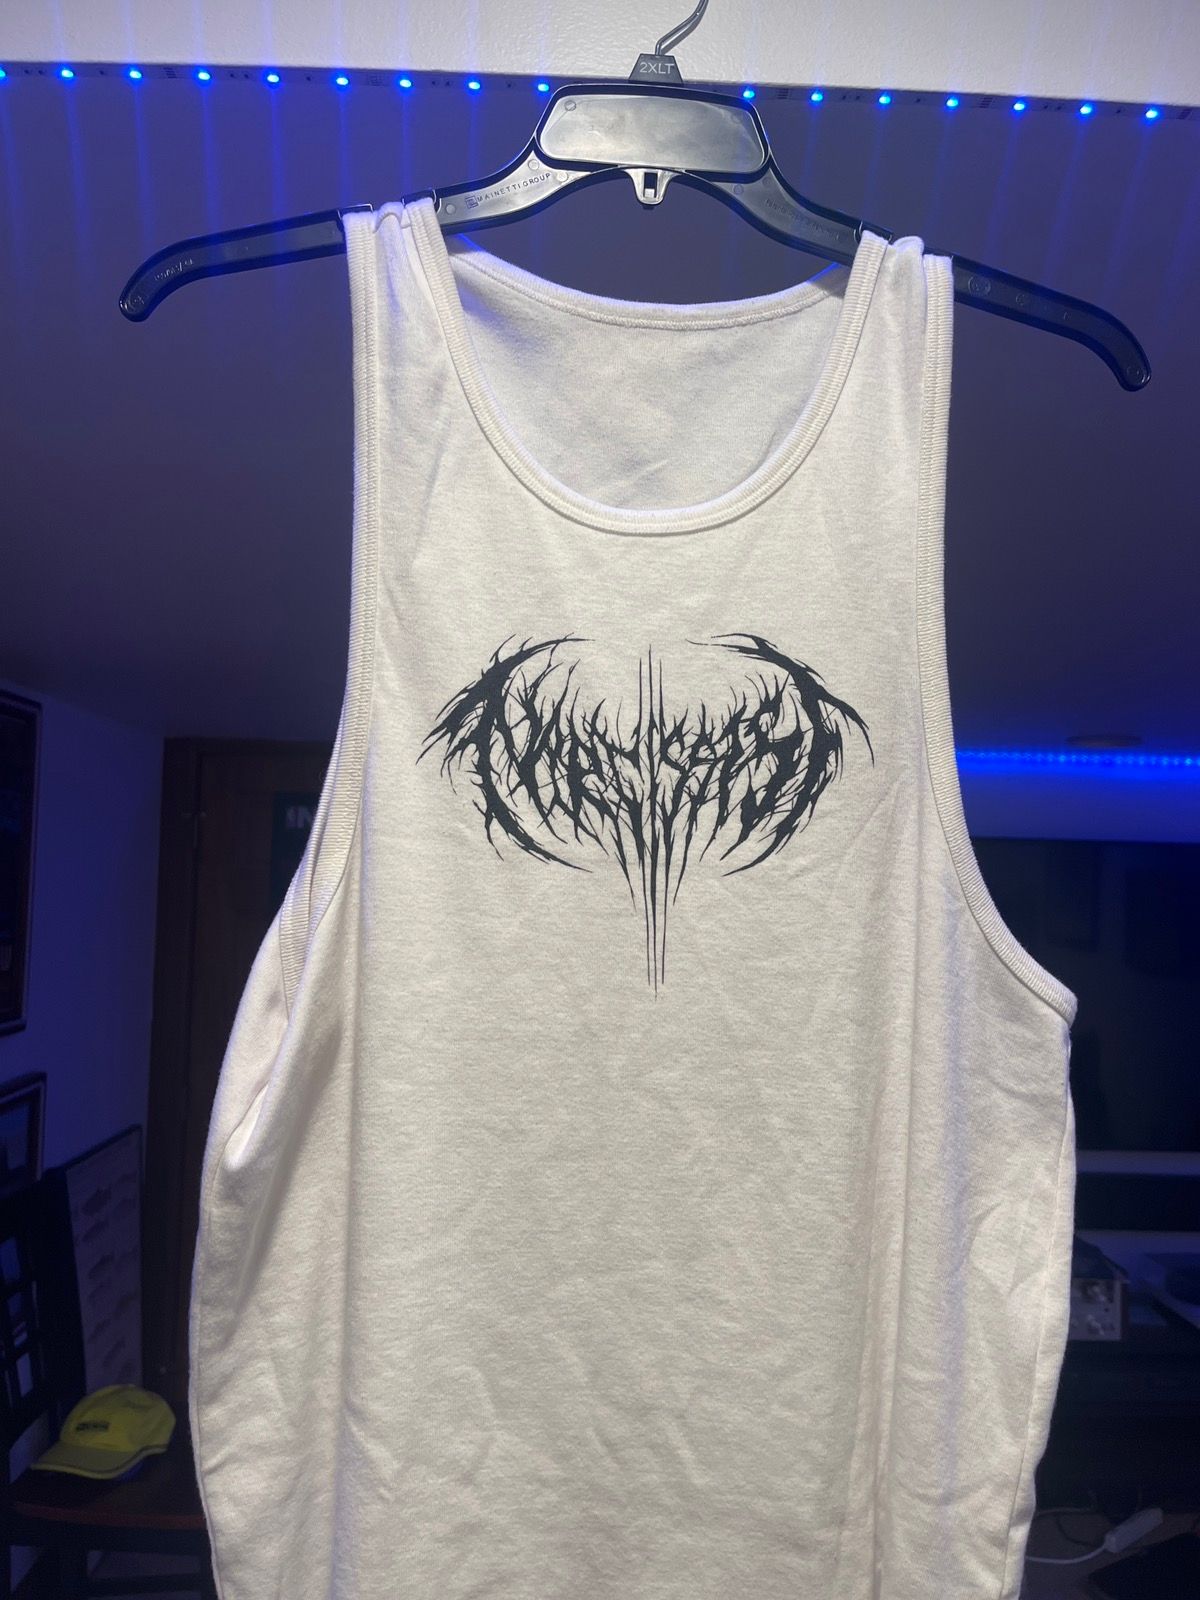 Pre-owned Playboi Carti Narcissist Opium Merch - Large White Tank Top